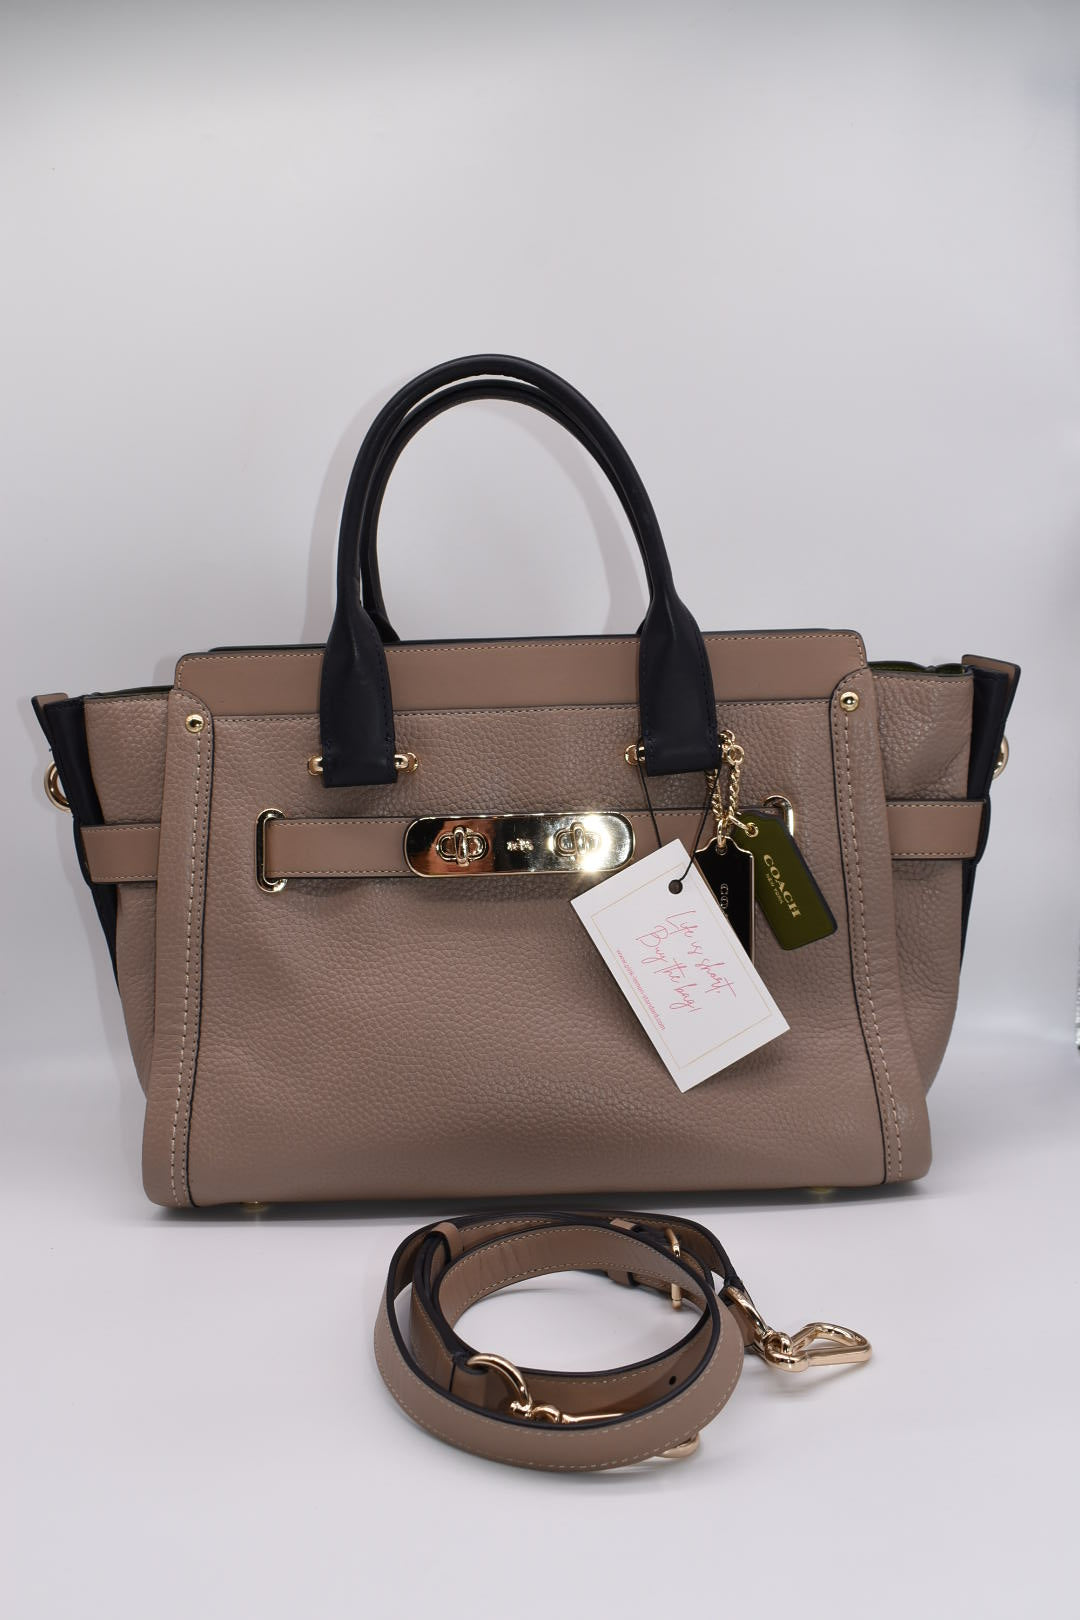 Coach Swagger Pebbled Leather Tote Bag in Colorblock